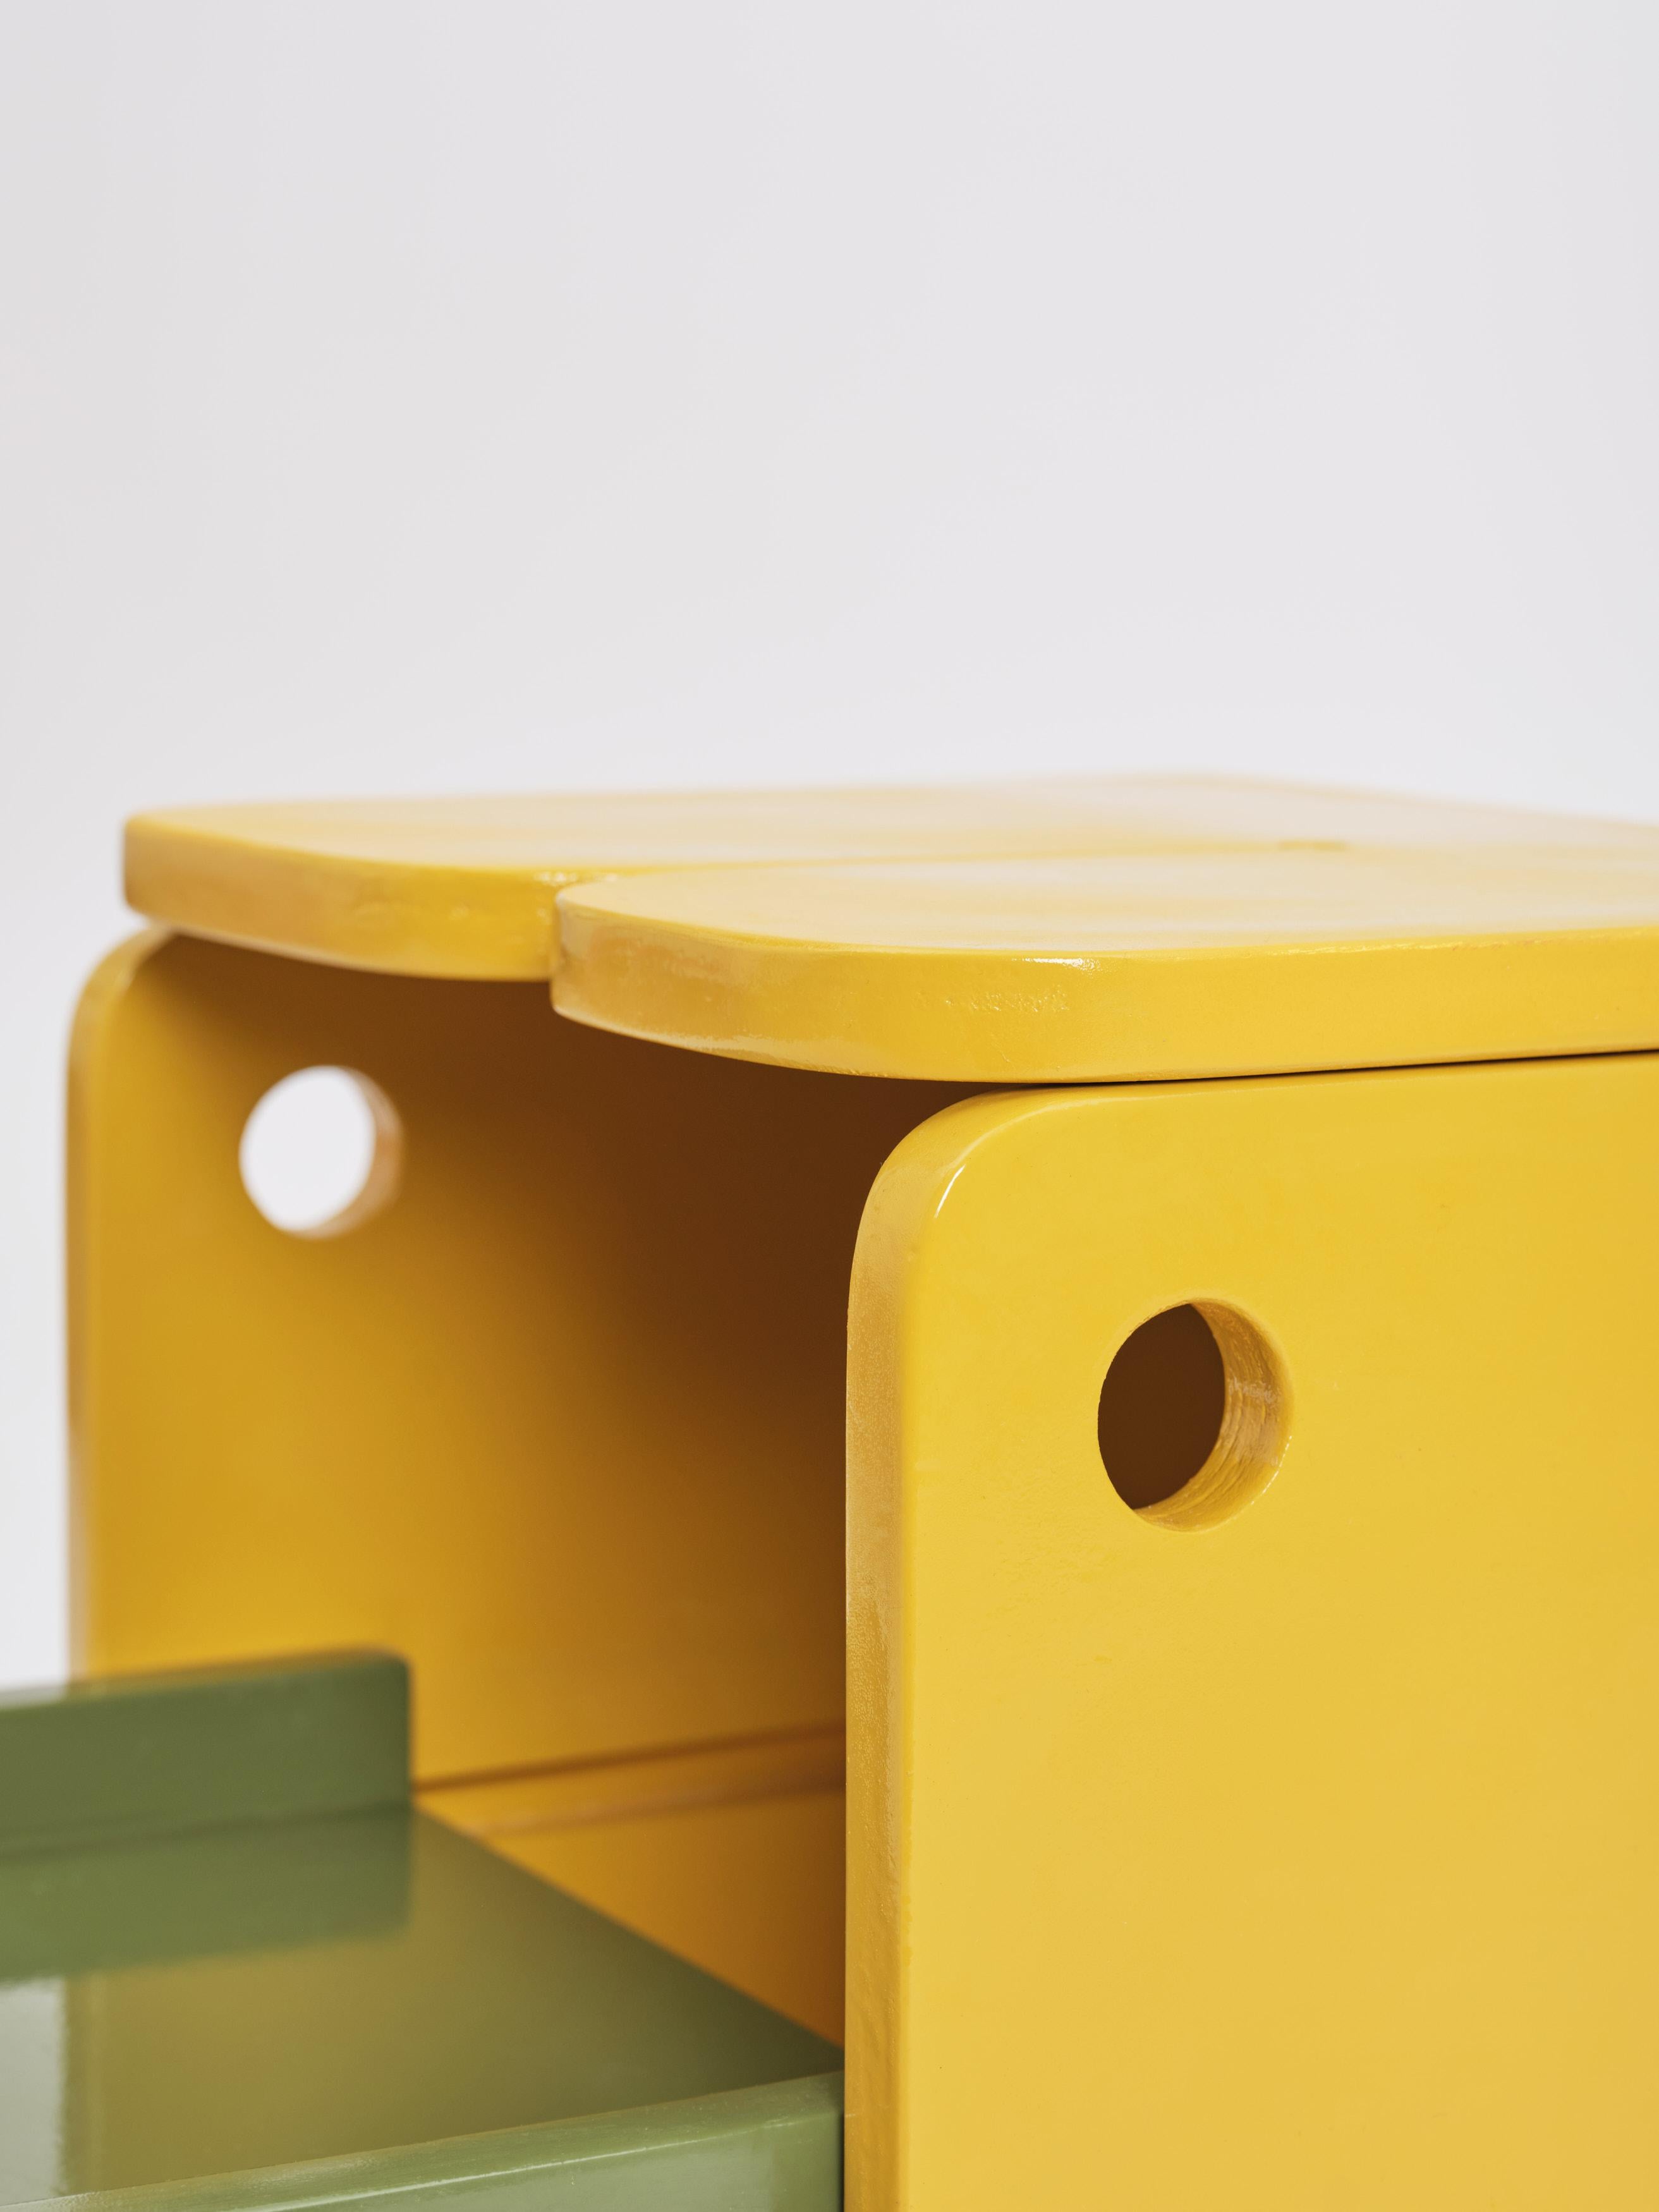 Eliofante

A chair for children
A step stool for adults

The “ELIOFANTE” was conceived upon invitation from the design studio Objects Of Common Interest and Art Athina - the annual international contemporary art fair in Athens, Greece - with